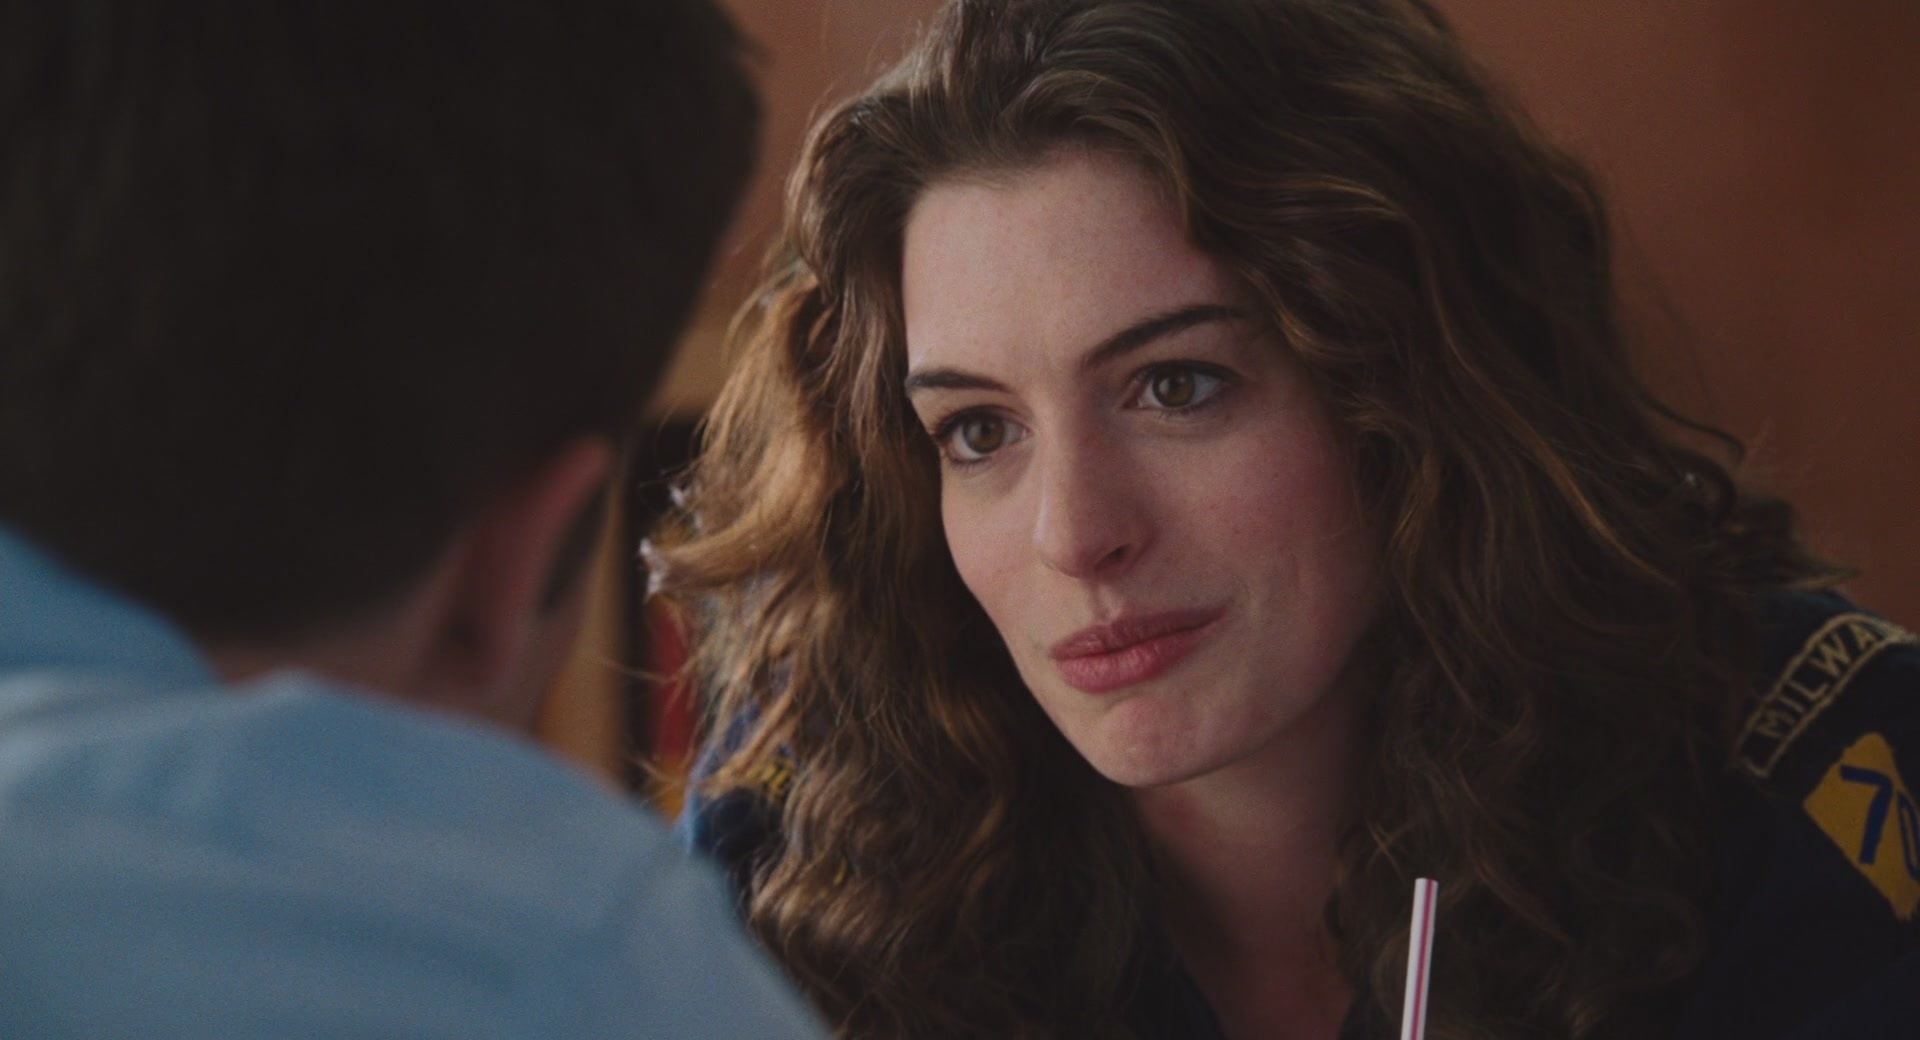 Love And Other Drugs Anne Hathaway Image 20562678 Fanpop | Free